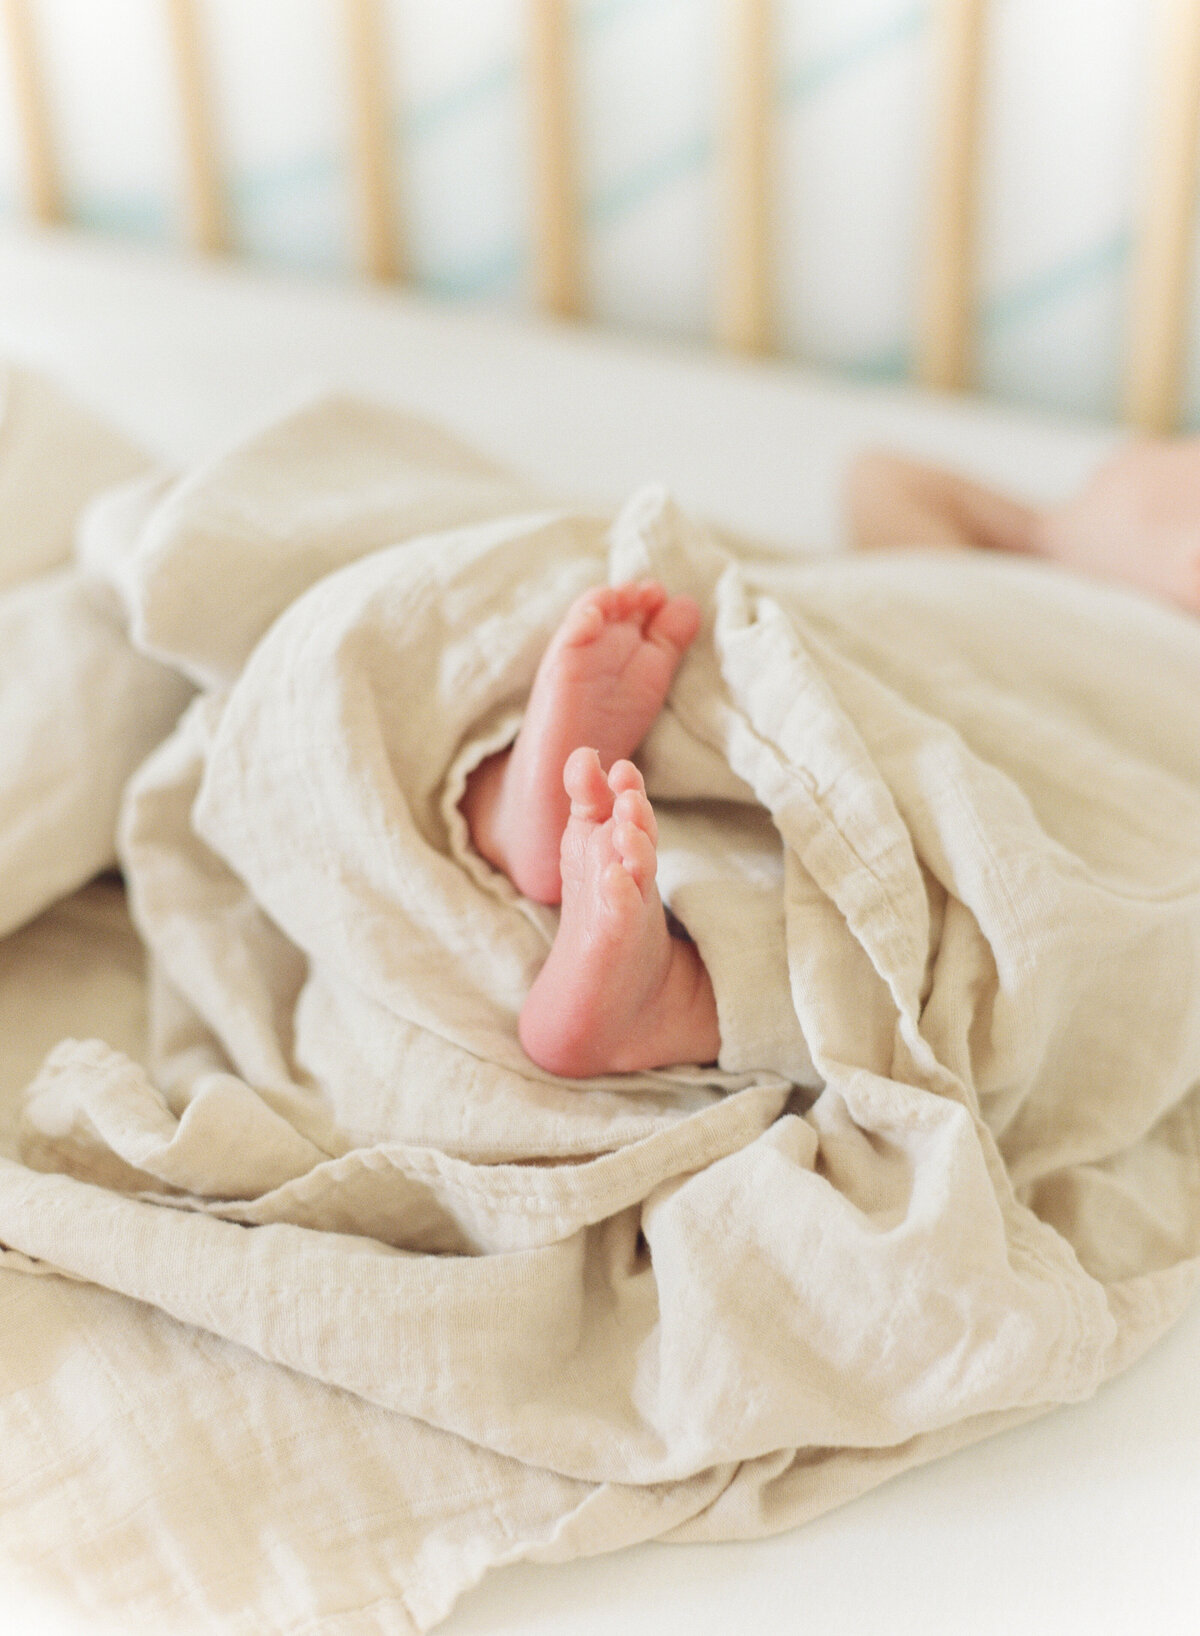 Baby toes peek out from a blanket during a Raleigh newborn session. Photographed by Raleigh Newborn Photographer A.J. Dunlap Photography.